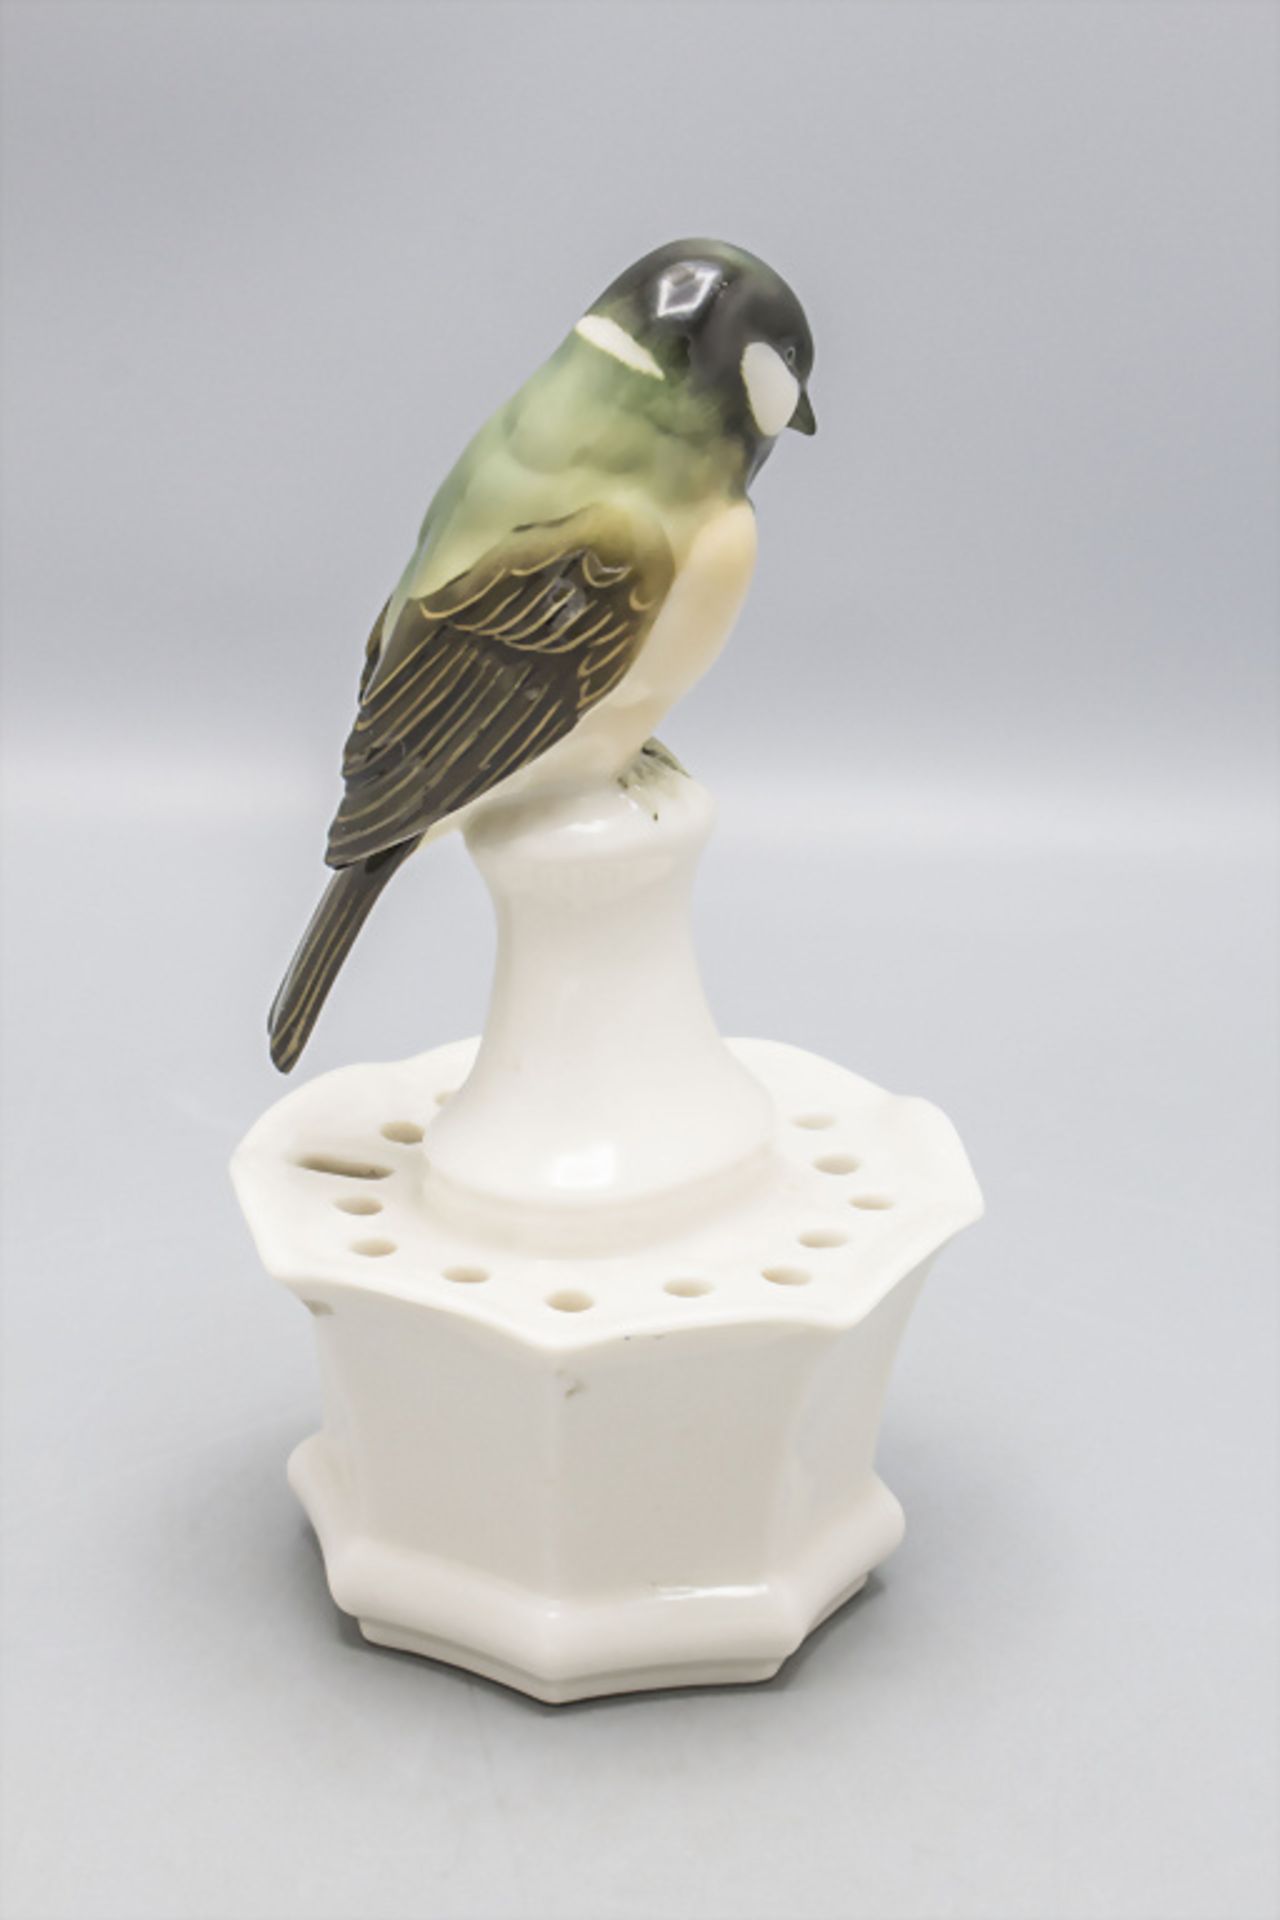 Kohlmeise auf Postament / Blumensteckschale / A great tit on a base with holes for flowers, ... - Image 3 of 5